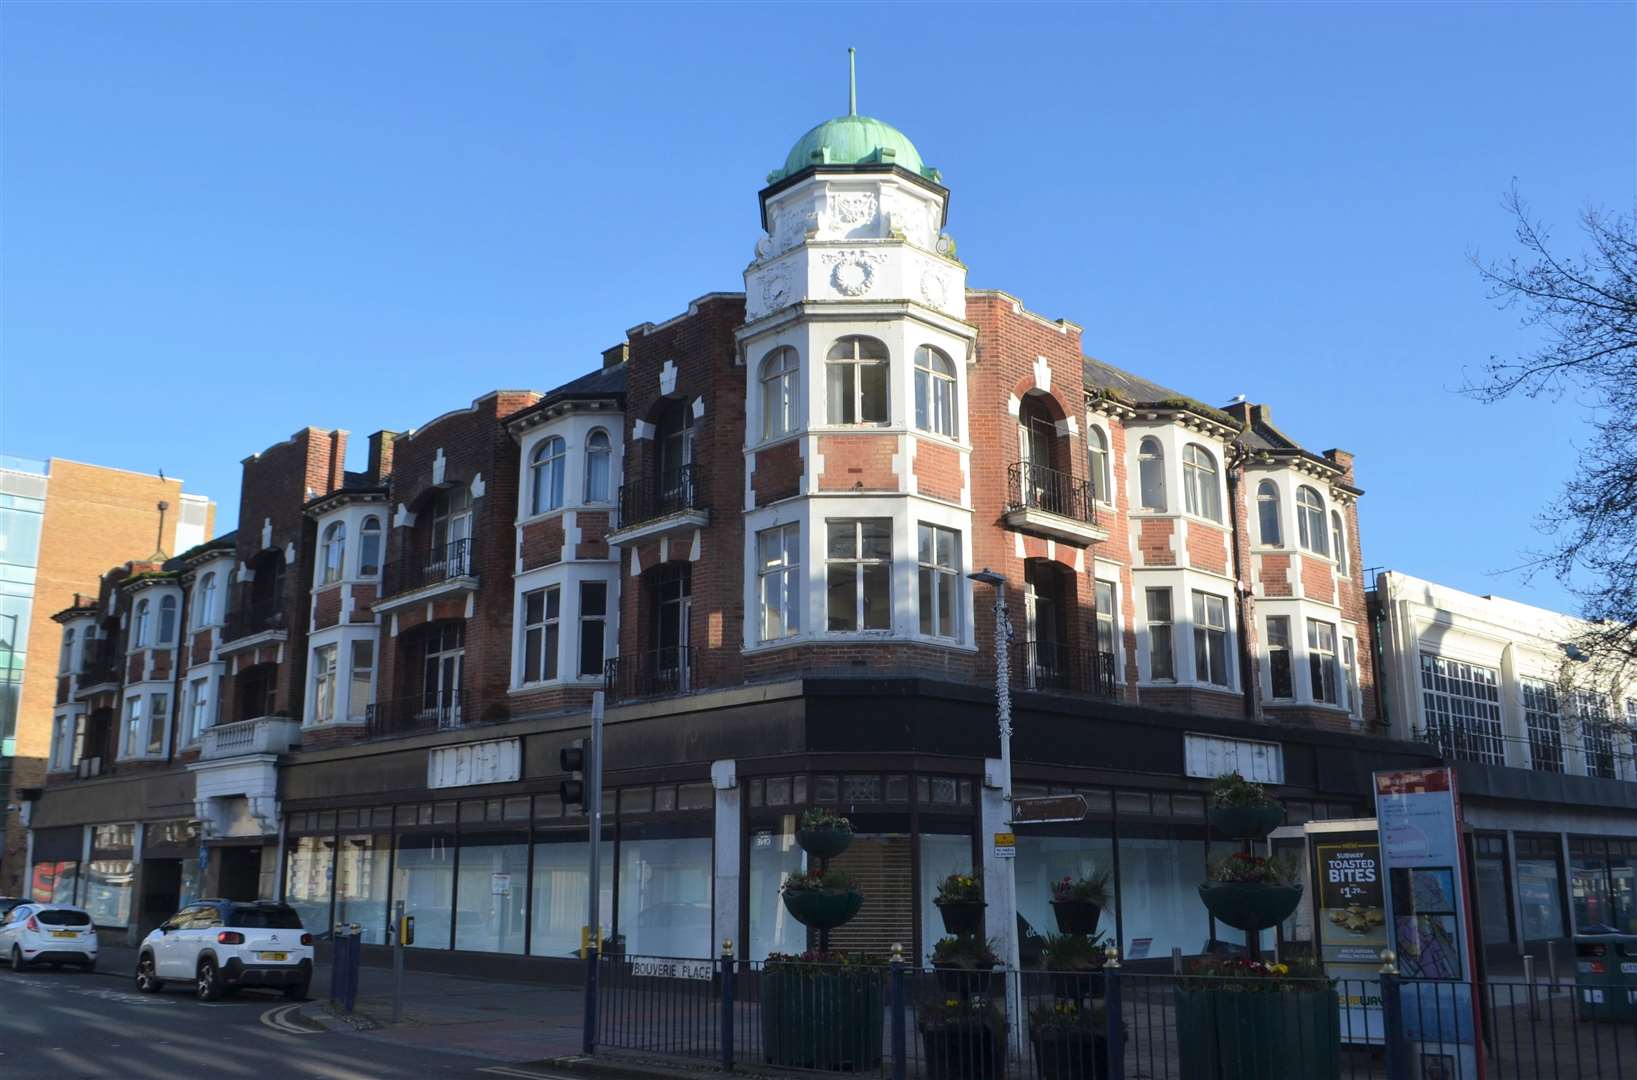 Part of the former Debenhams store in Folkestone will be demolished to make way for a health centre